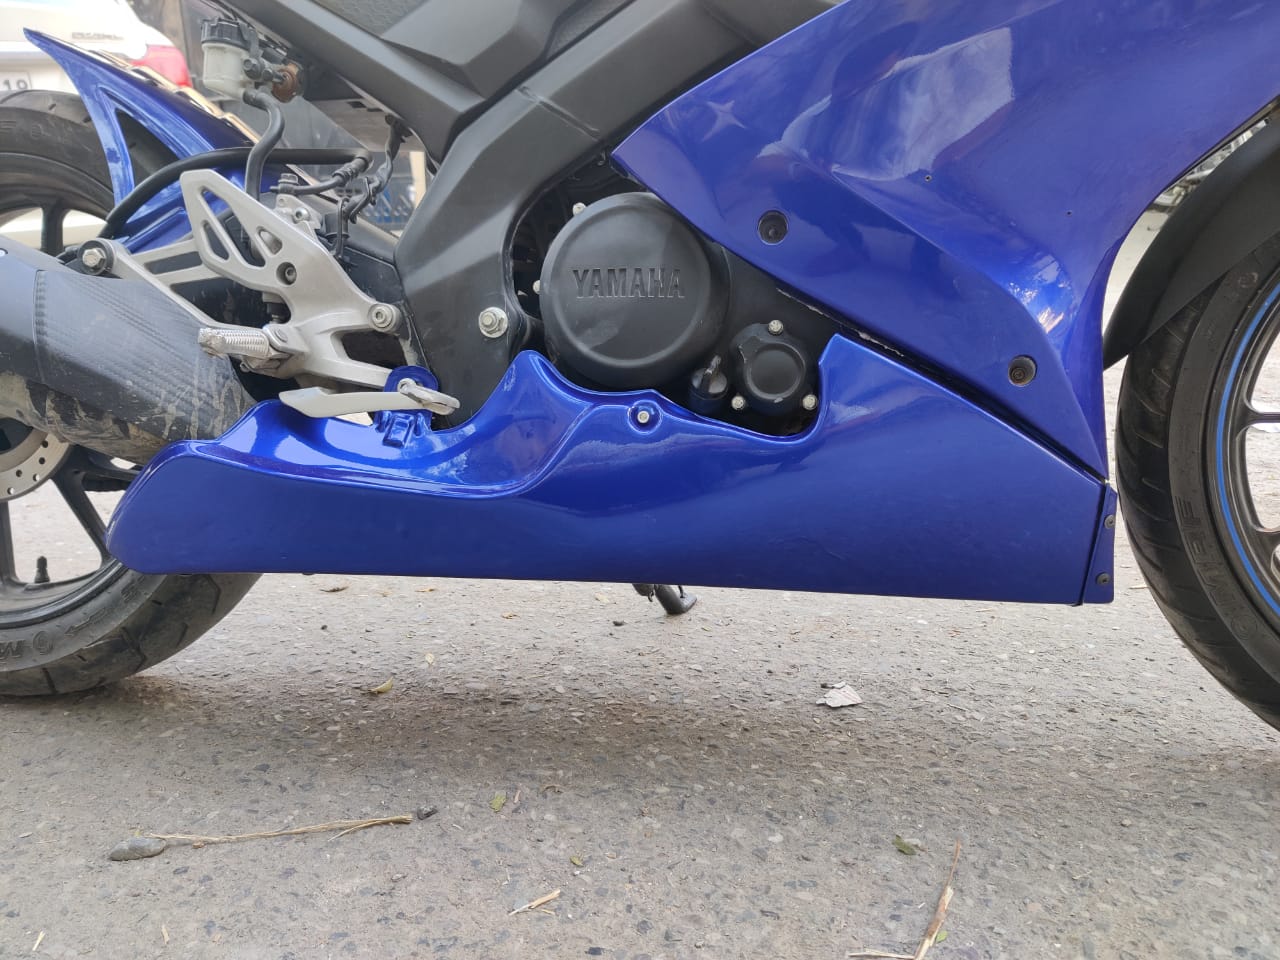 Yamaha R15 V3 Accessories | Modified R15v3 | Best R15 Modification | Saiga Parts Underbelly